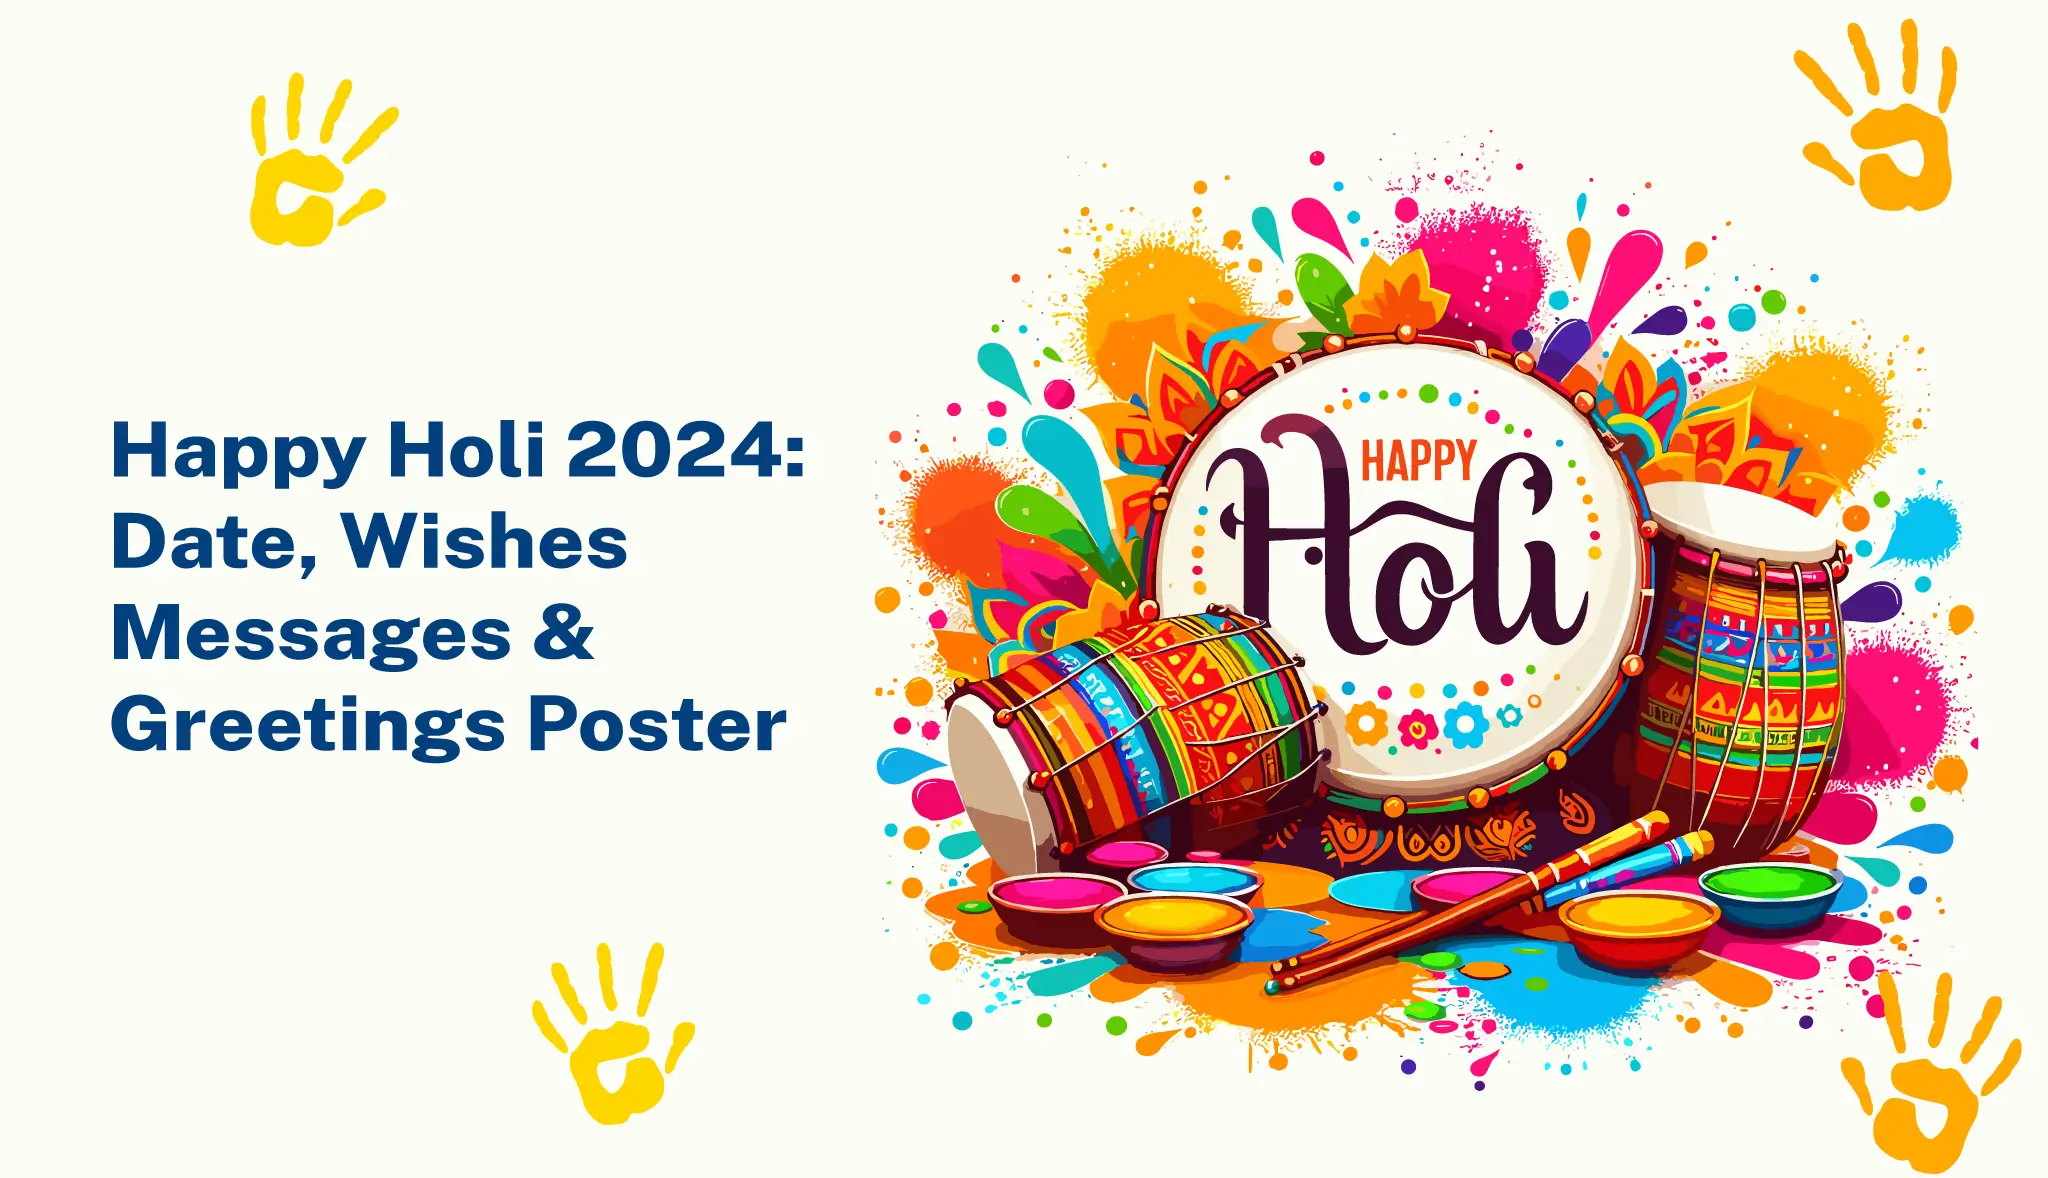 Happy Holi 2024: Date, Wishes Messages & Greetings Poster - Postive